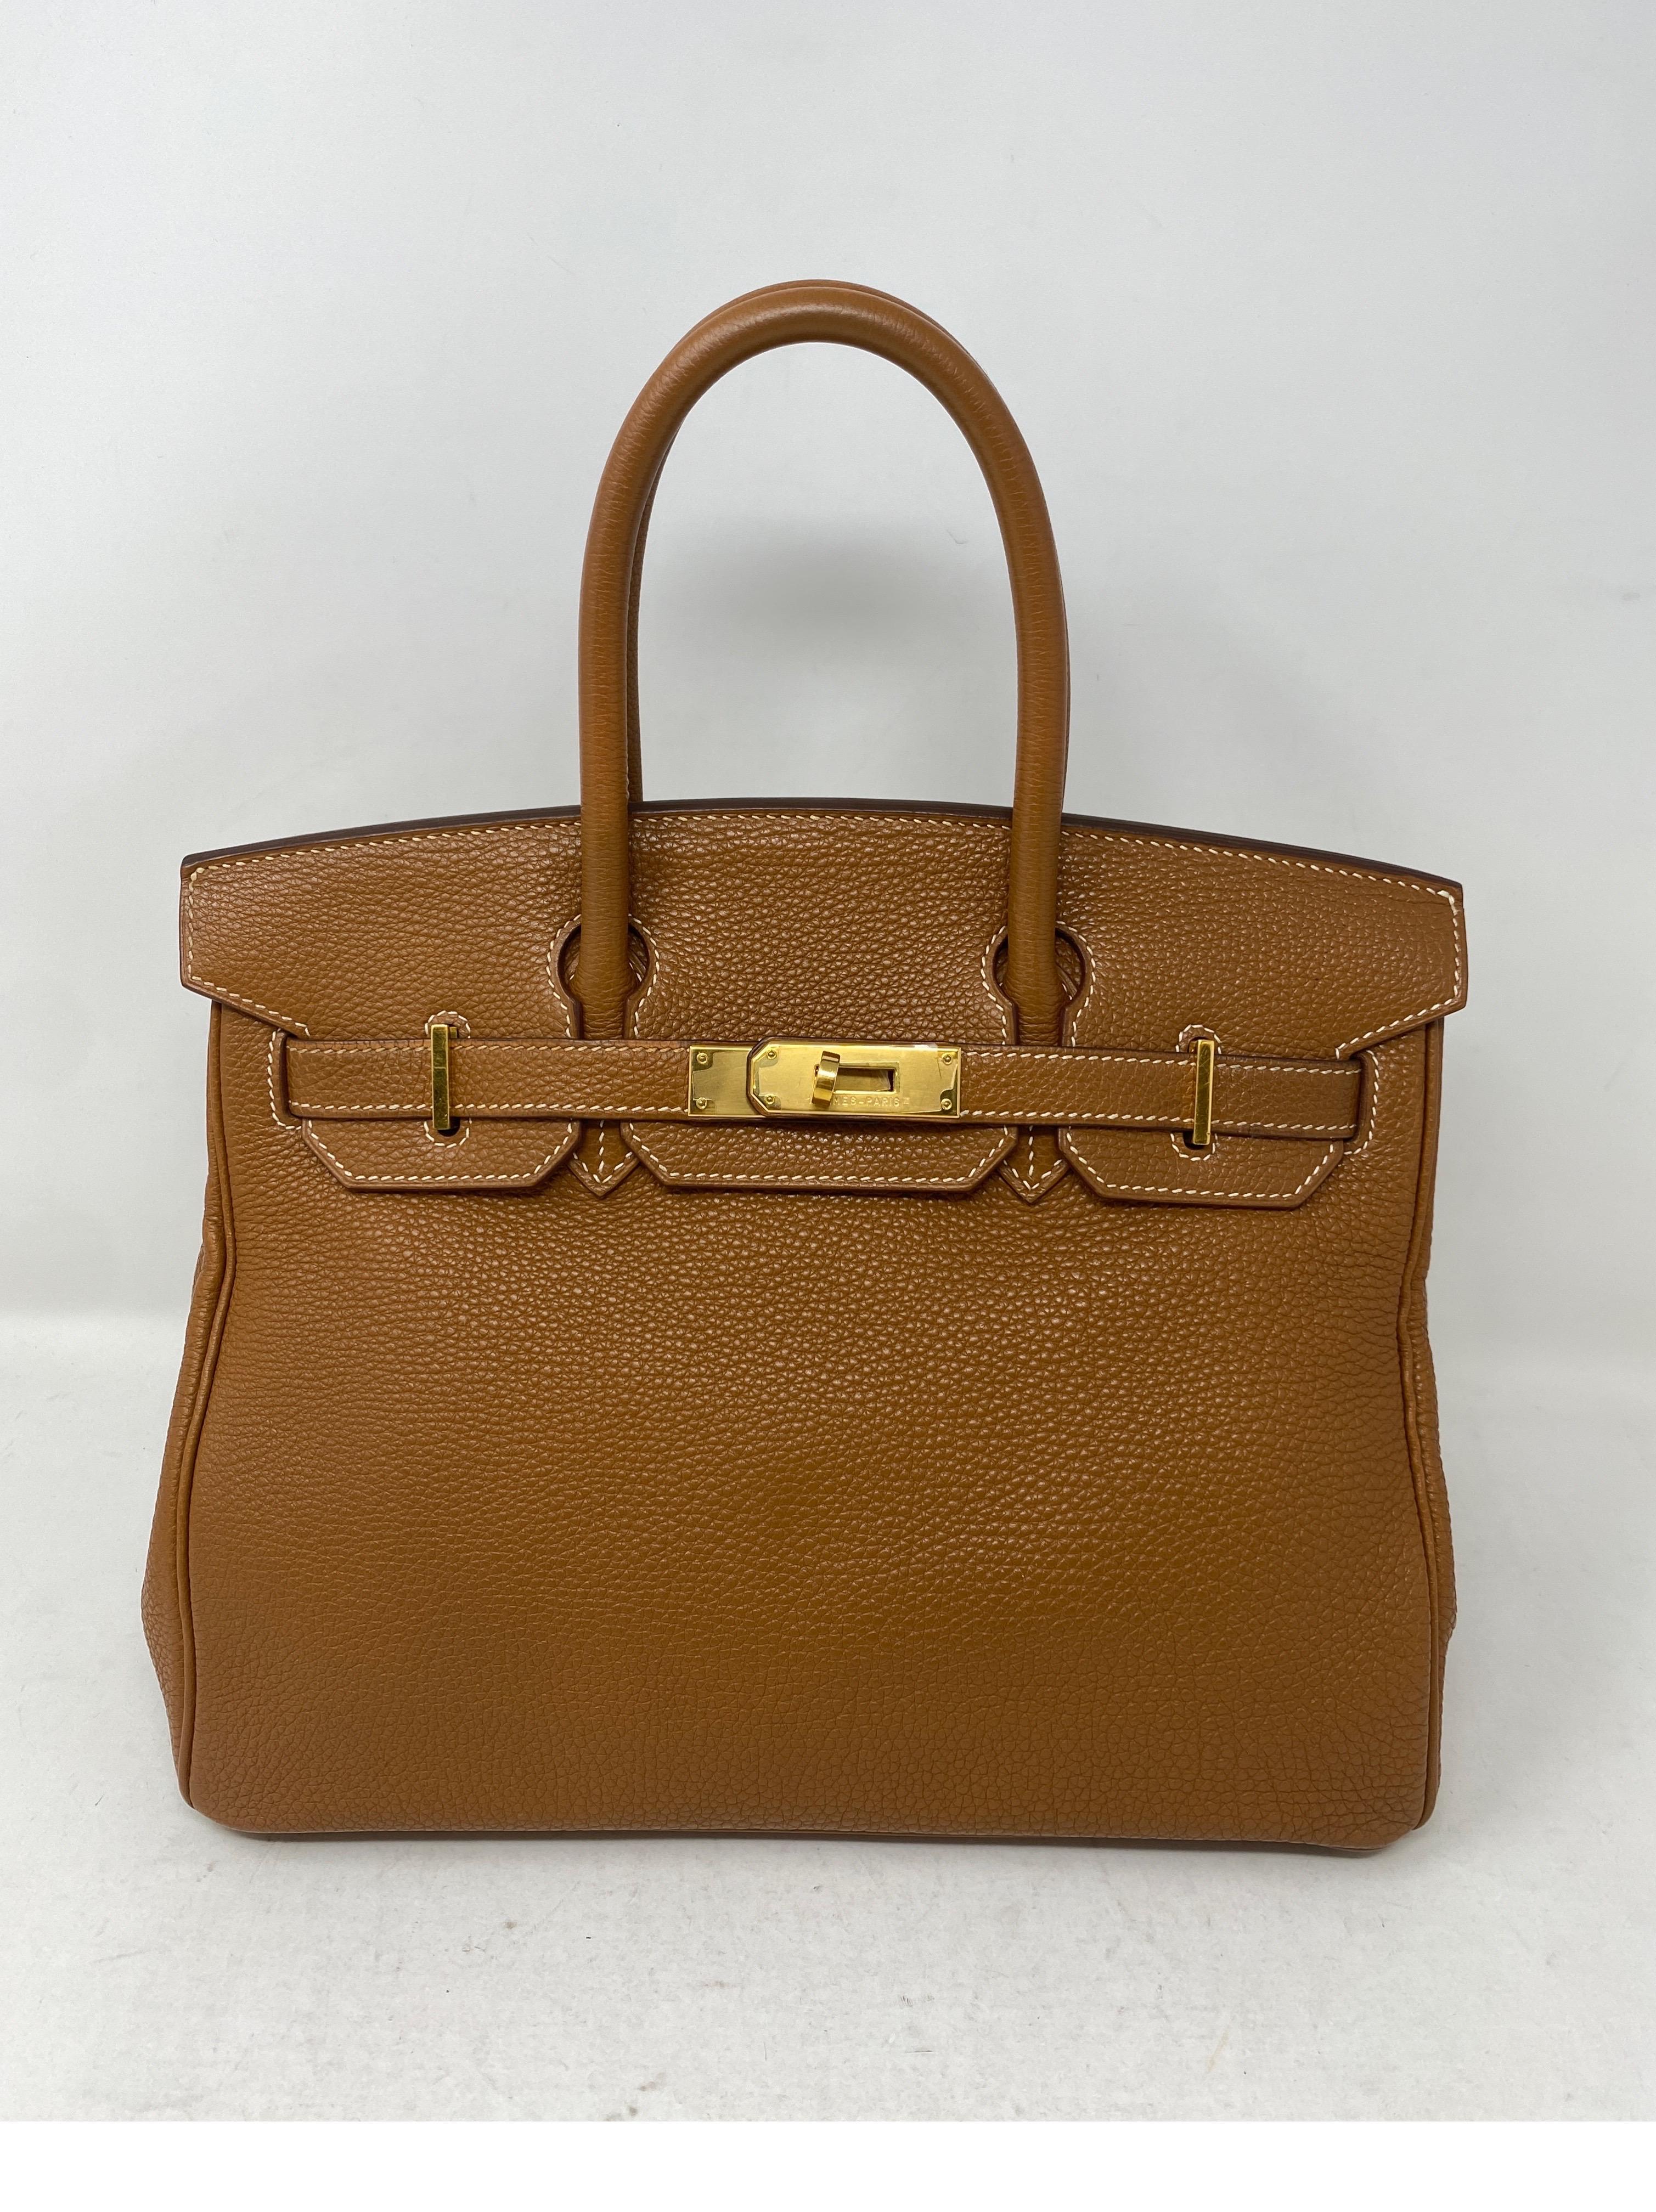 Hermes Gold Birkin 30 Bag. Togo gold leather with gold hardware. Excellent condition. Beautiful gold tan color is a classic. Includes clochette, lock, keys, and dust cover. Guaranteed authentic. 